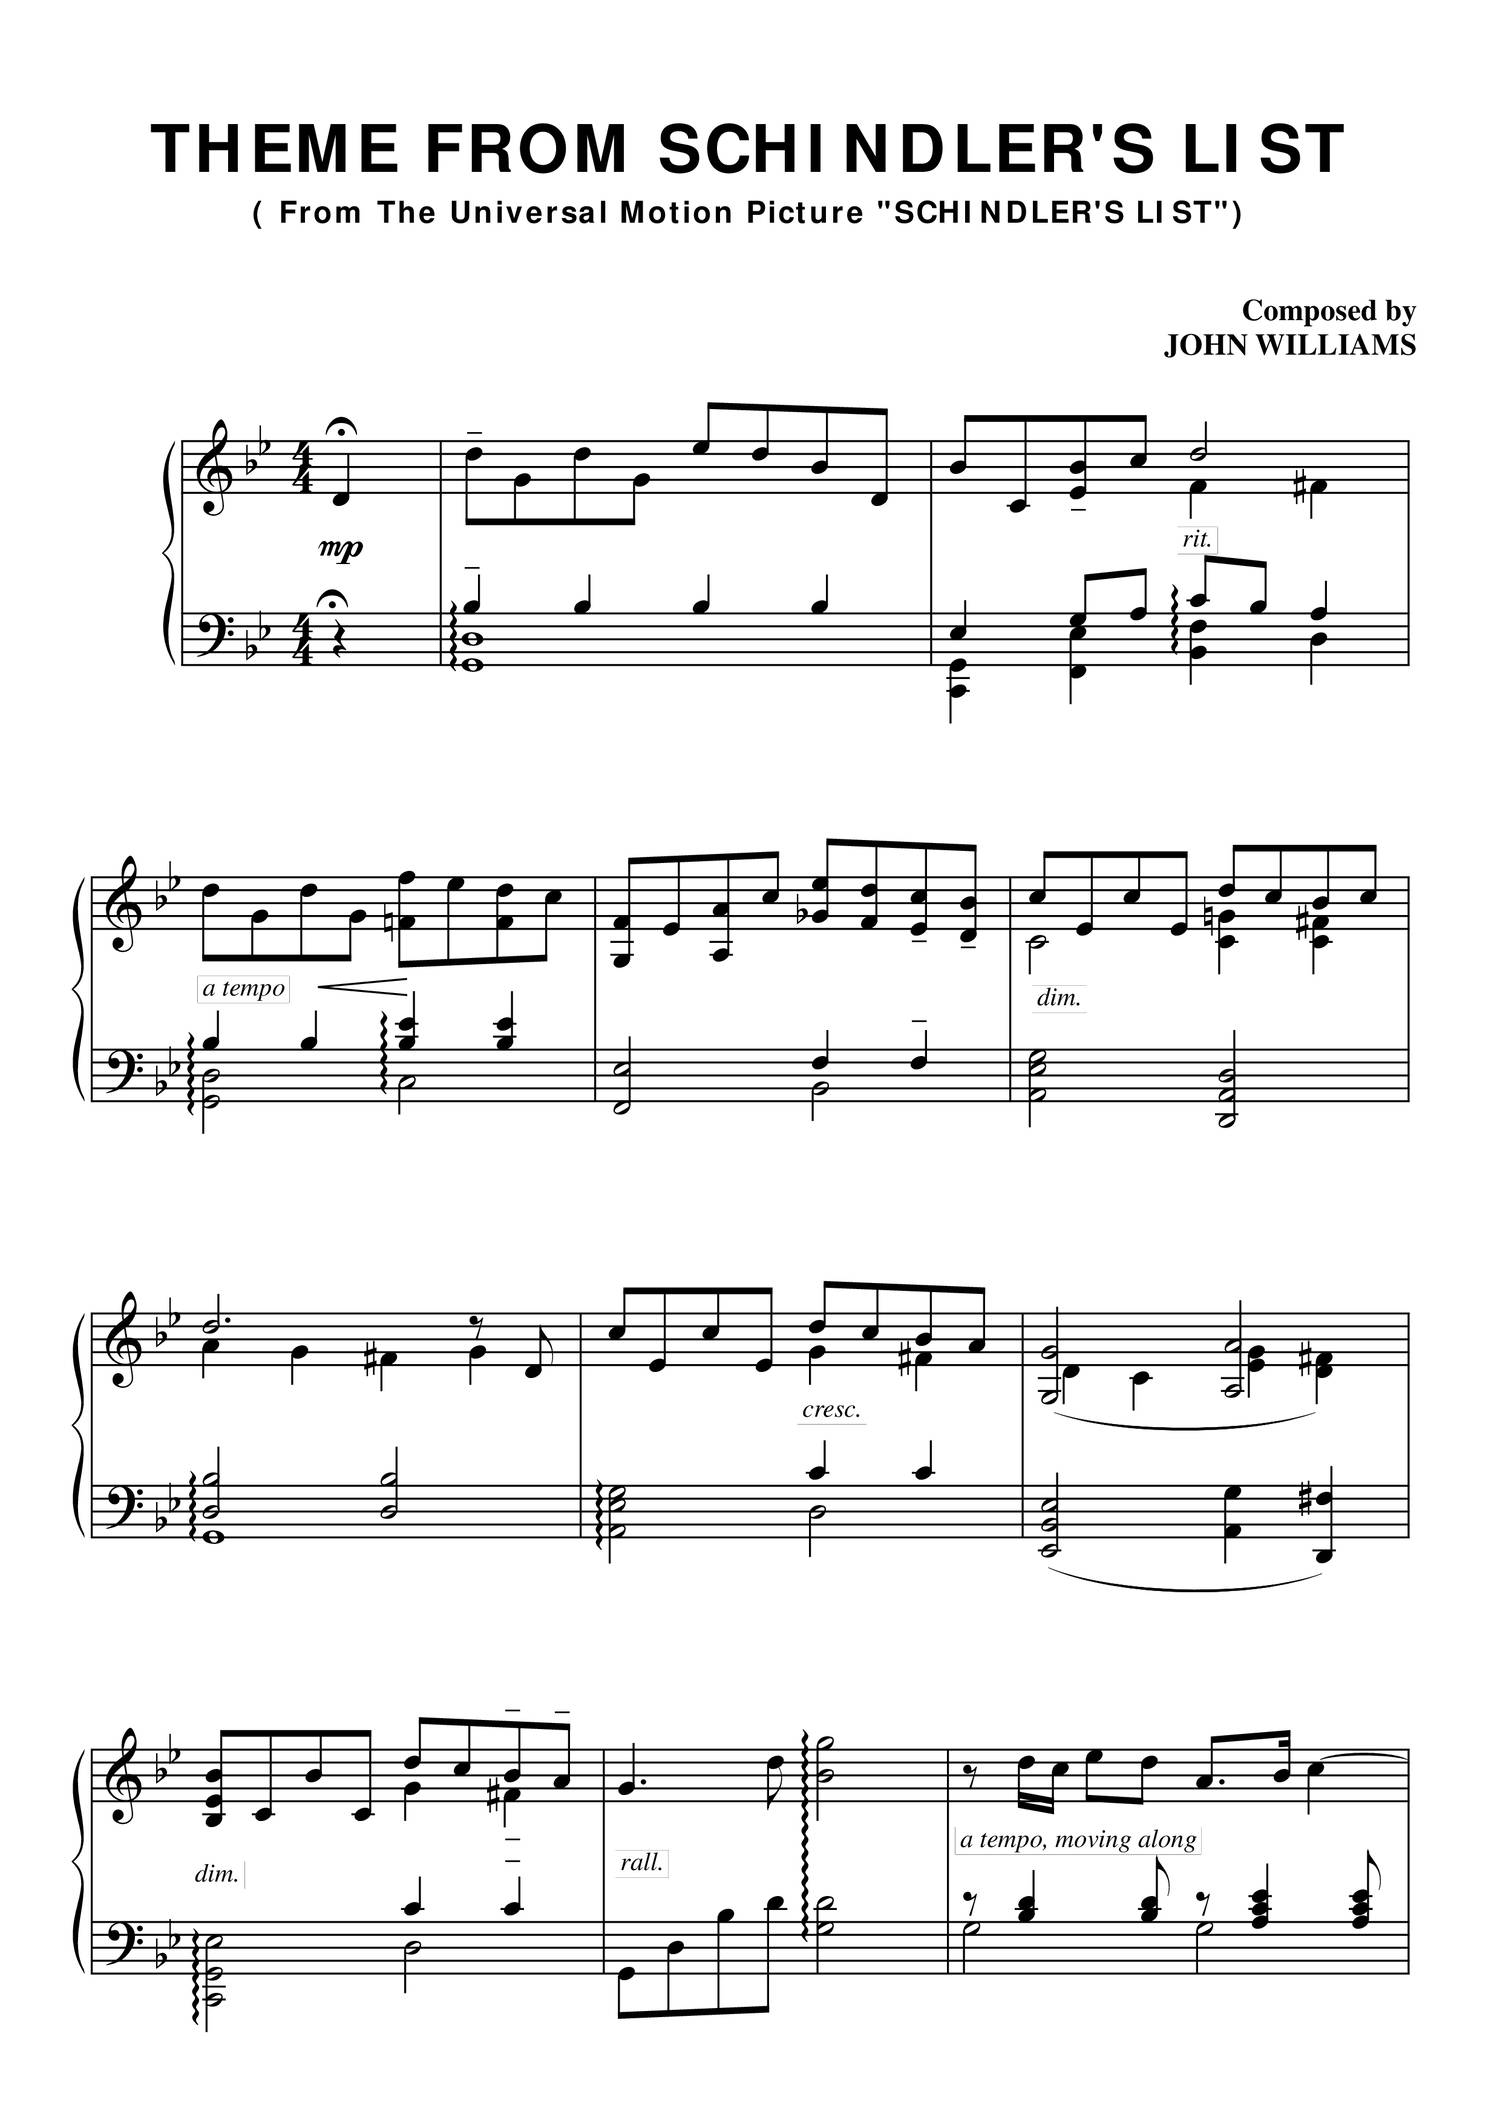 Schindlers List Theme - PIANO SHEET.pdf | DocDroid